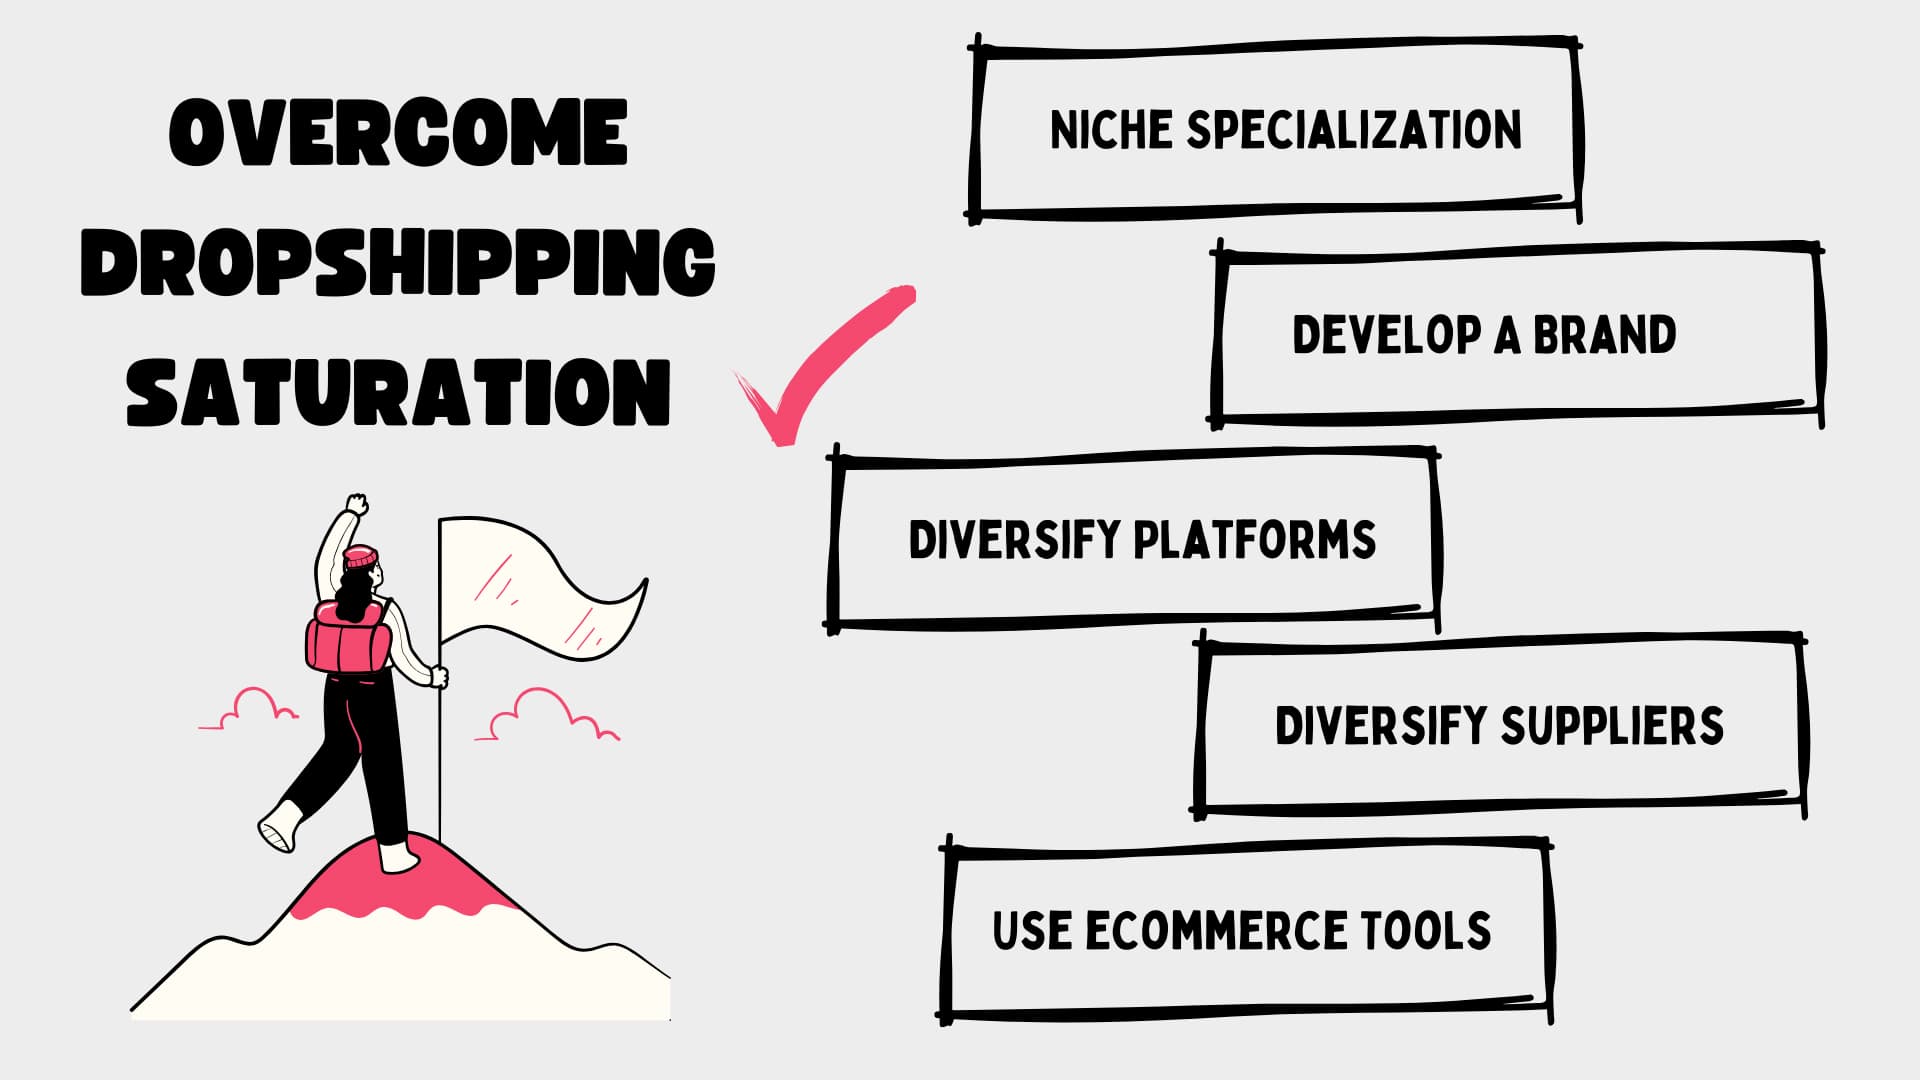 infographic how to overcome dropshipping saturation